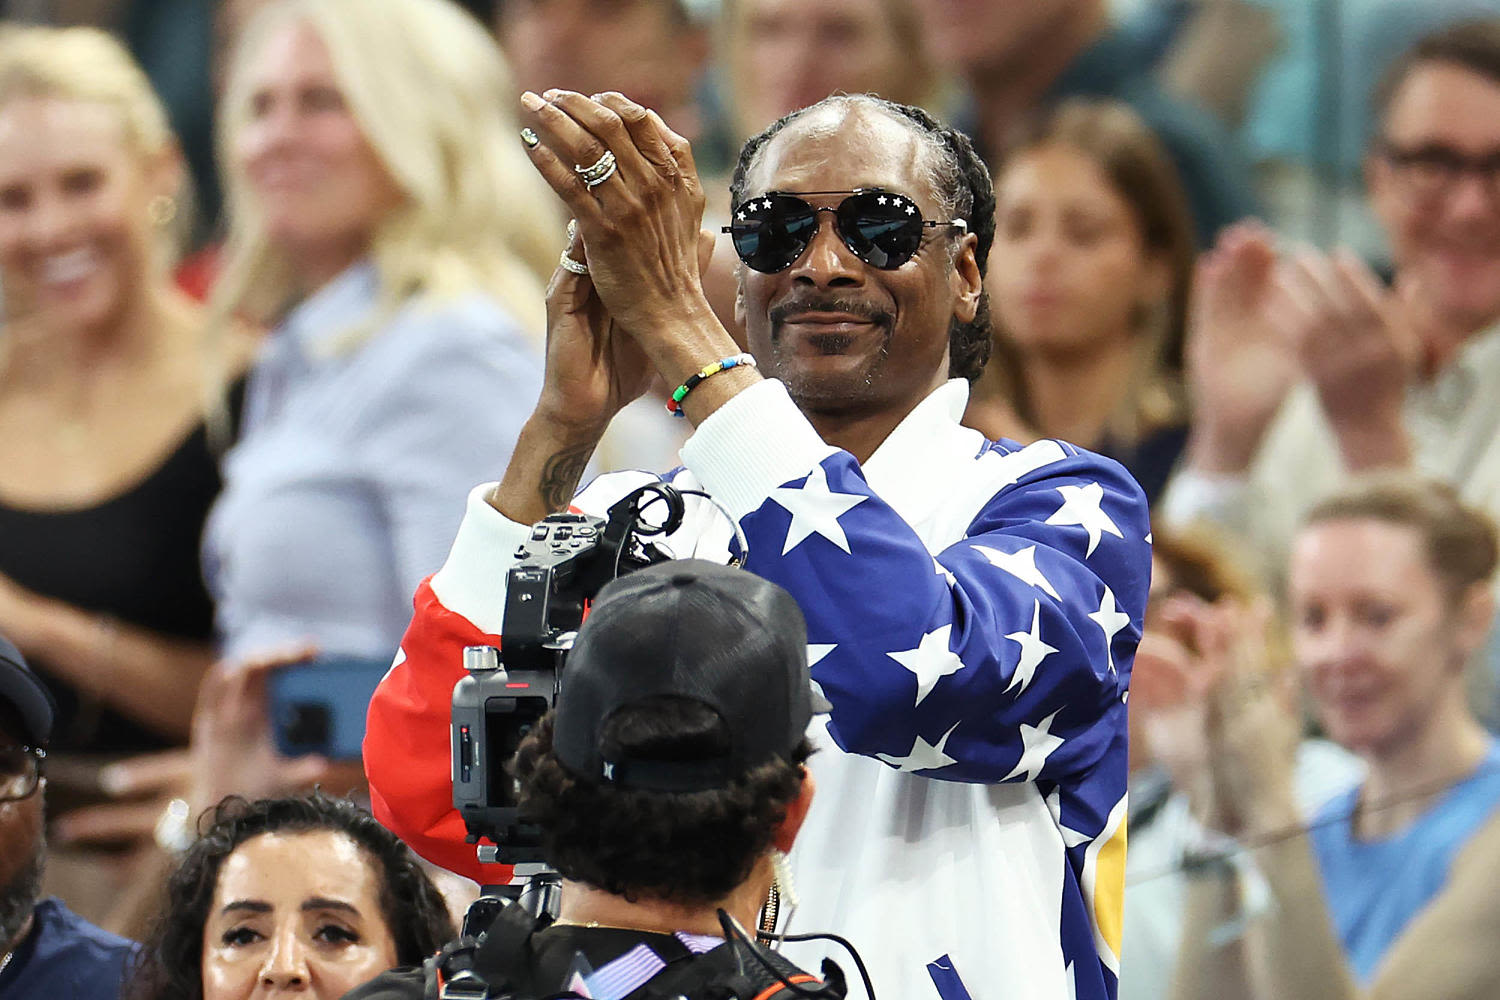 See what happened when Simone Biles, Jordan Chiles spotted Snoop Dogg dancing in the crowd